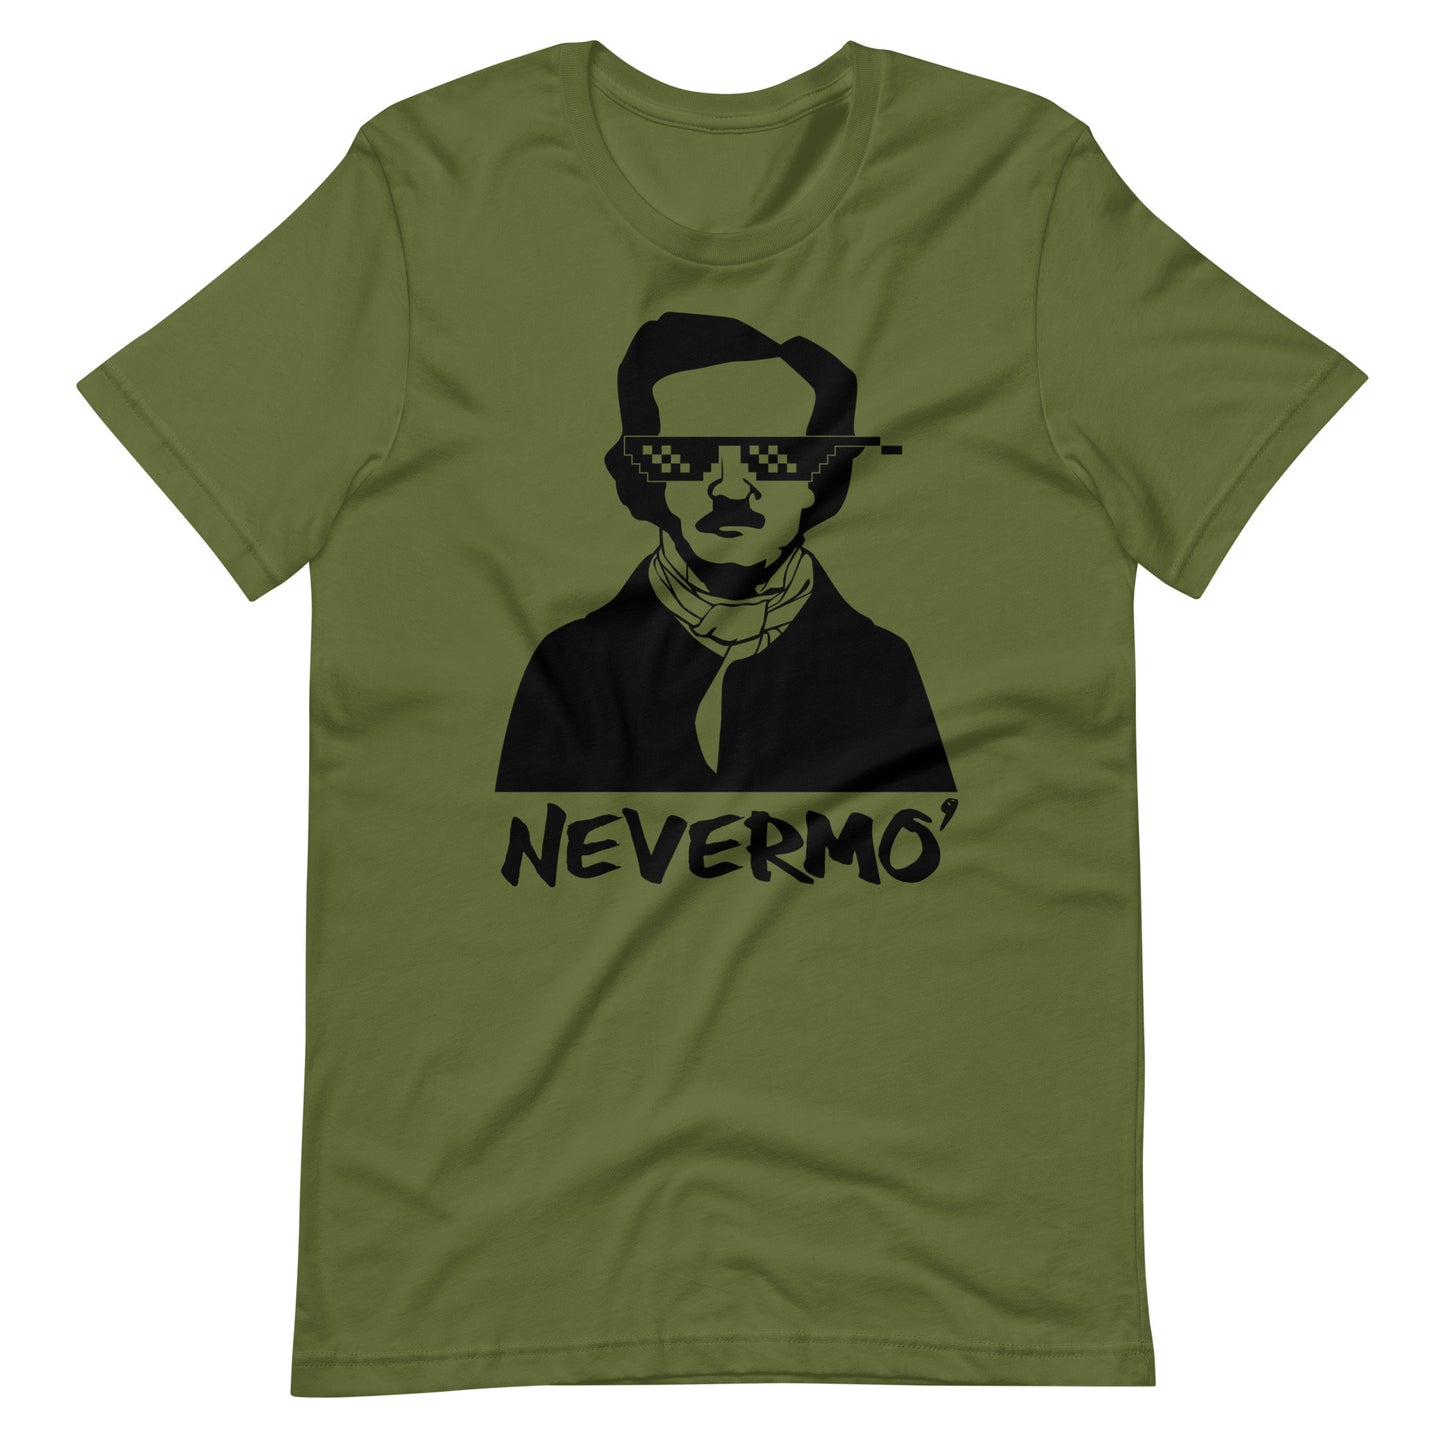 Men's Edgar Allan Poe "The Nevermo" T-Shirt - Olive Front